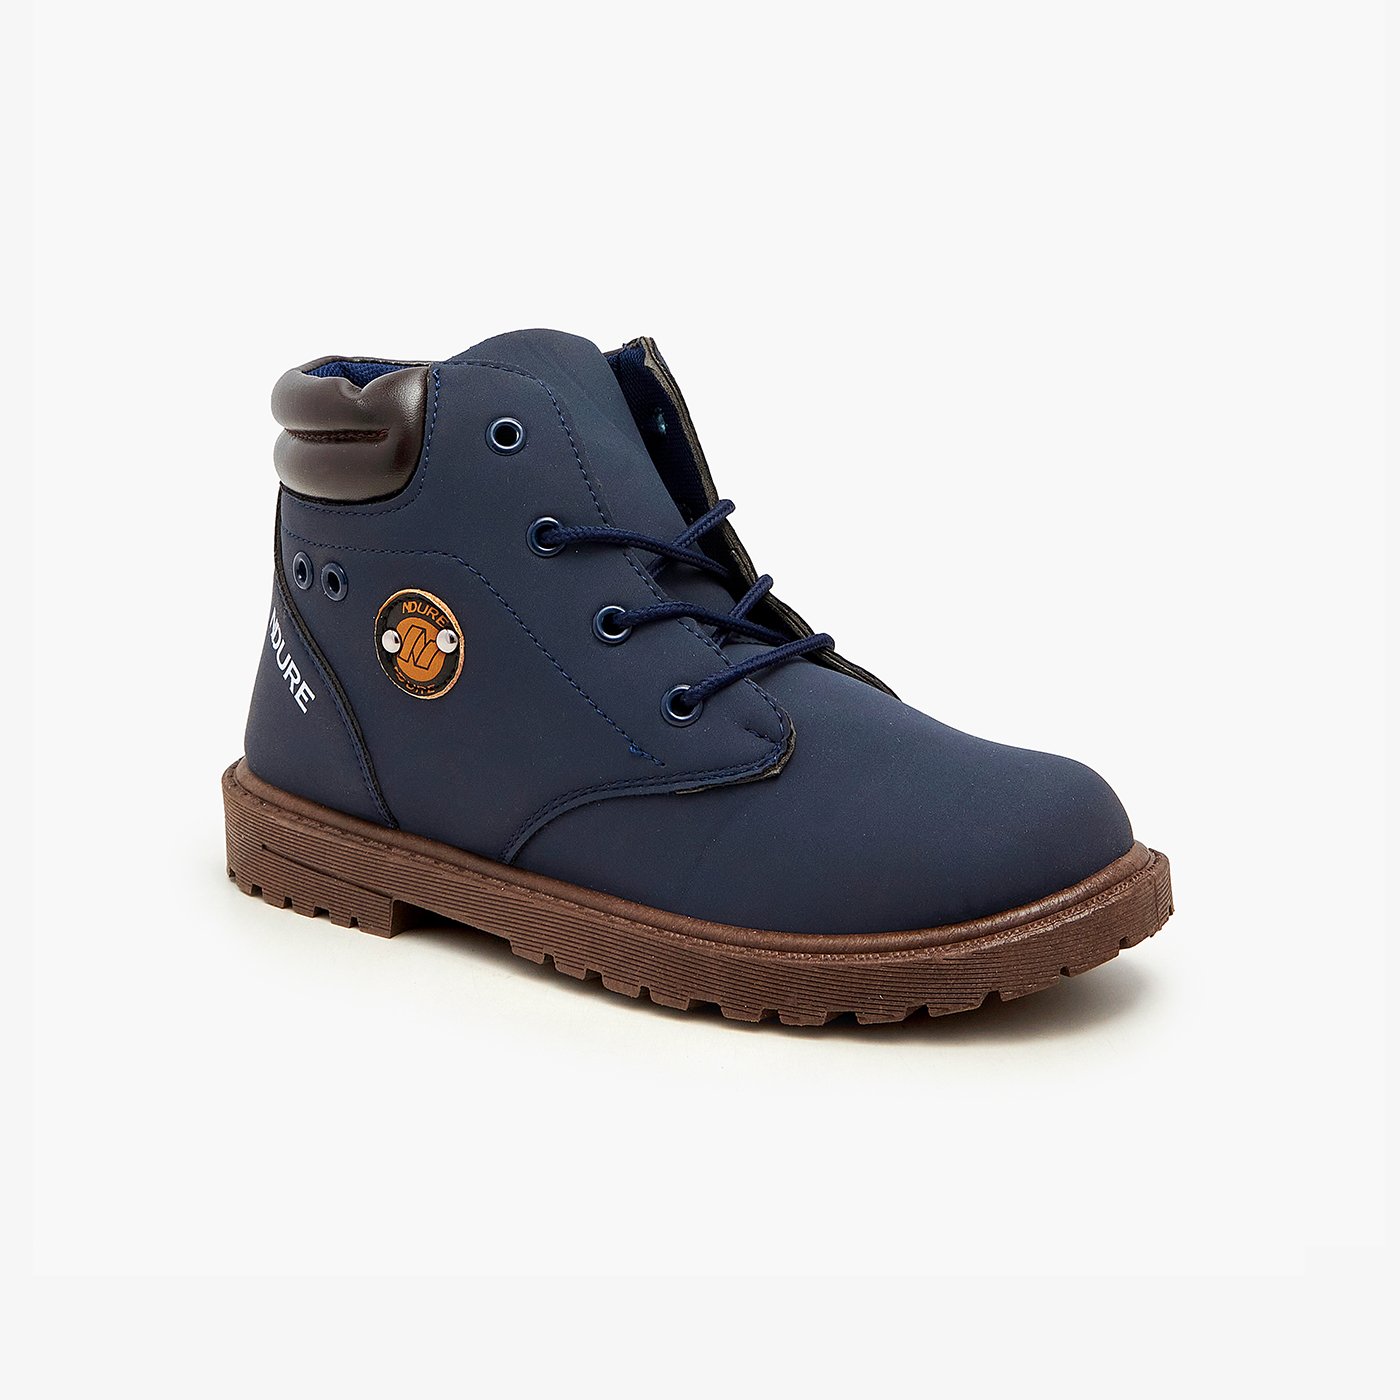 Boys Smart Ankle Boots